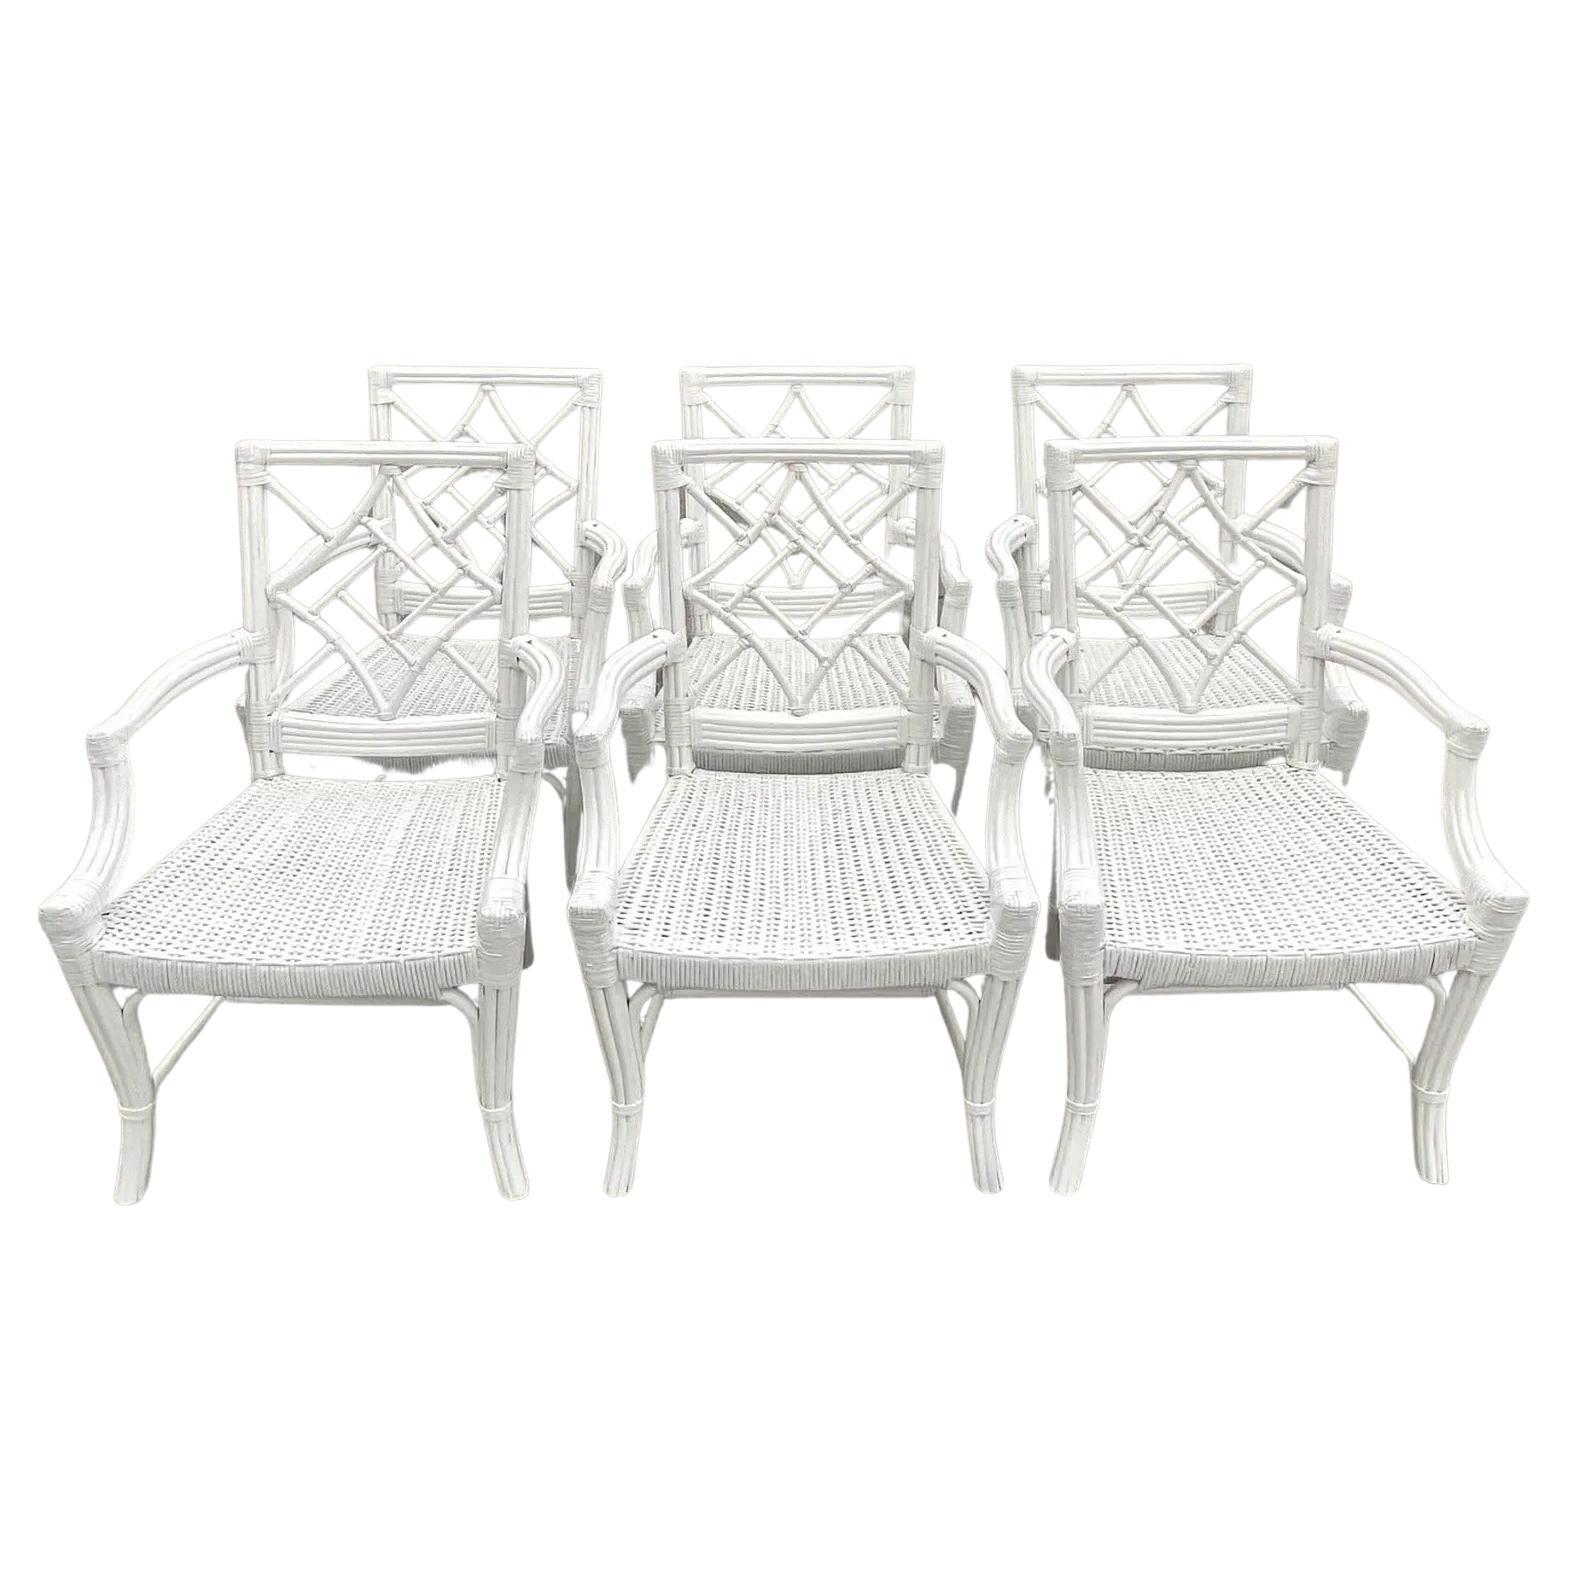 Vintage Coastal White Lacquered Diamond Back Dining Chairs - Set of 6